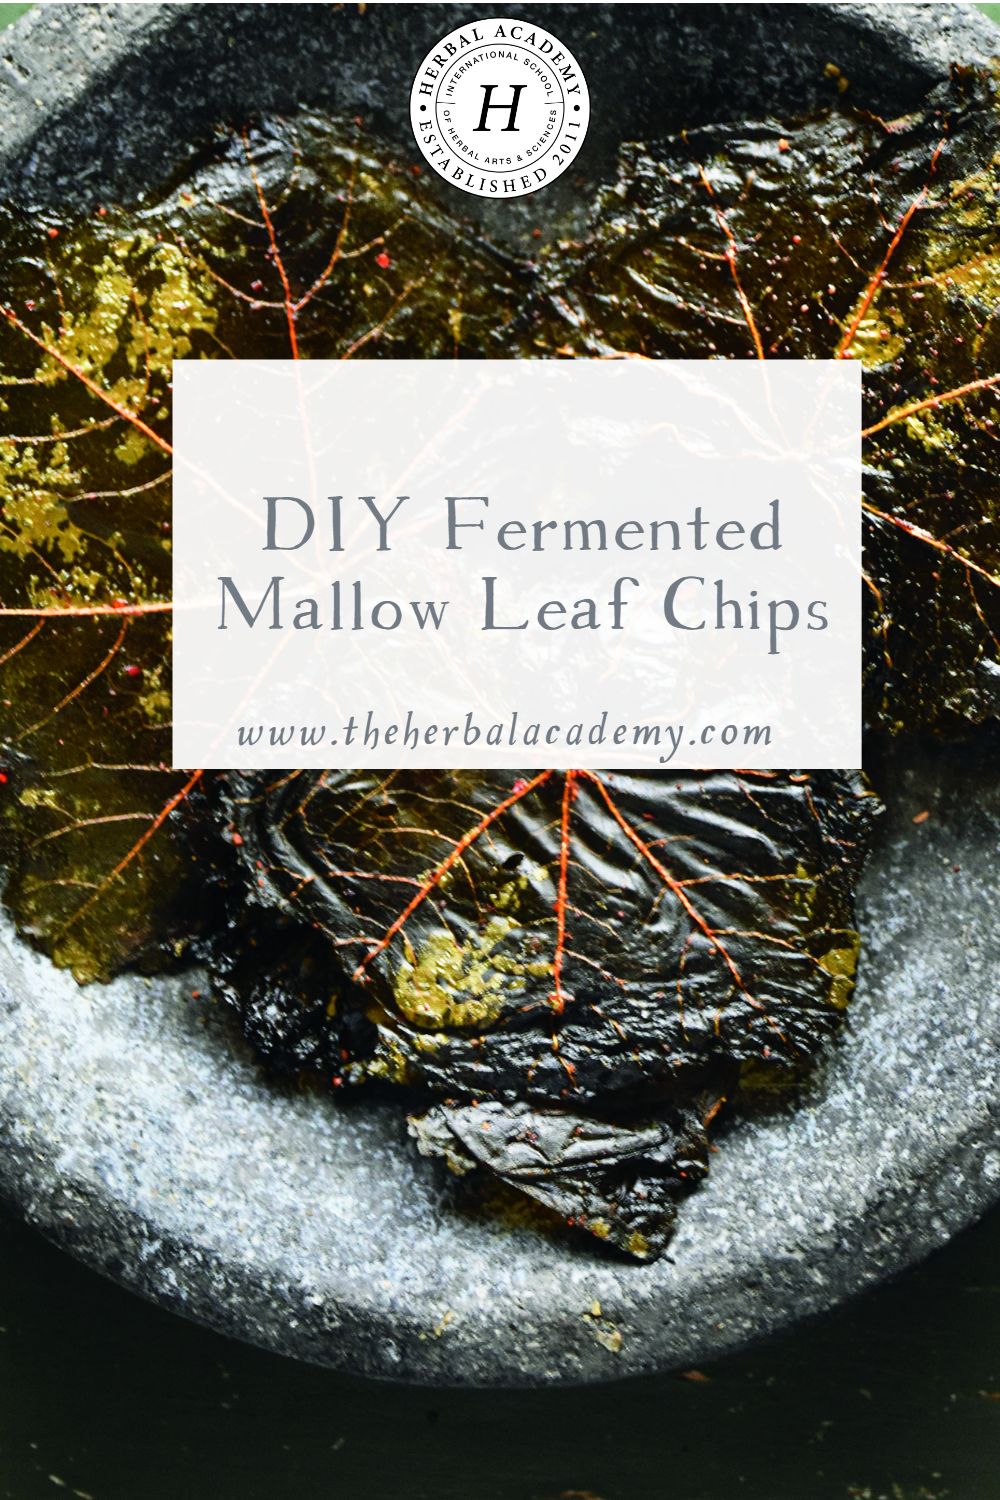 DIY Fermented Mallow Leaf Chips | Herbal Academy | These fermented mallow leaf chips have all the flavors—salty, bitter, sour, and spicy—and are a fun way to enjoy your local wild edibles!